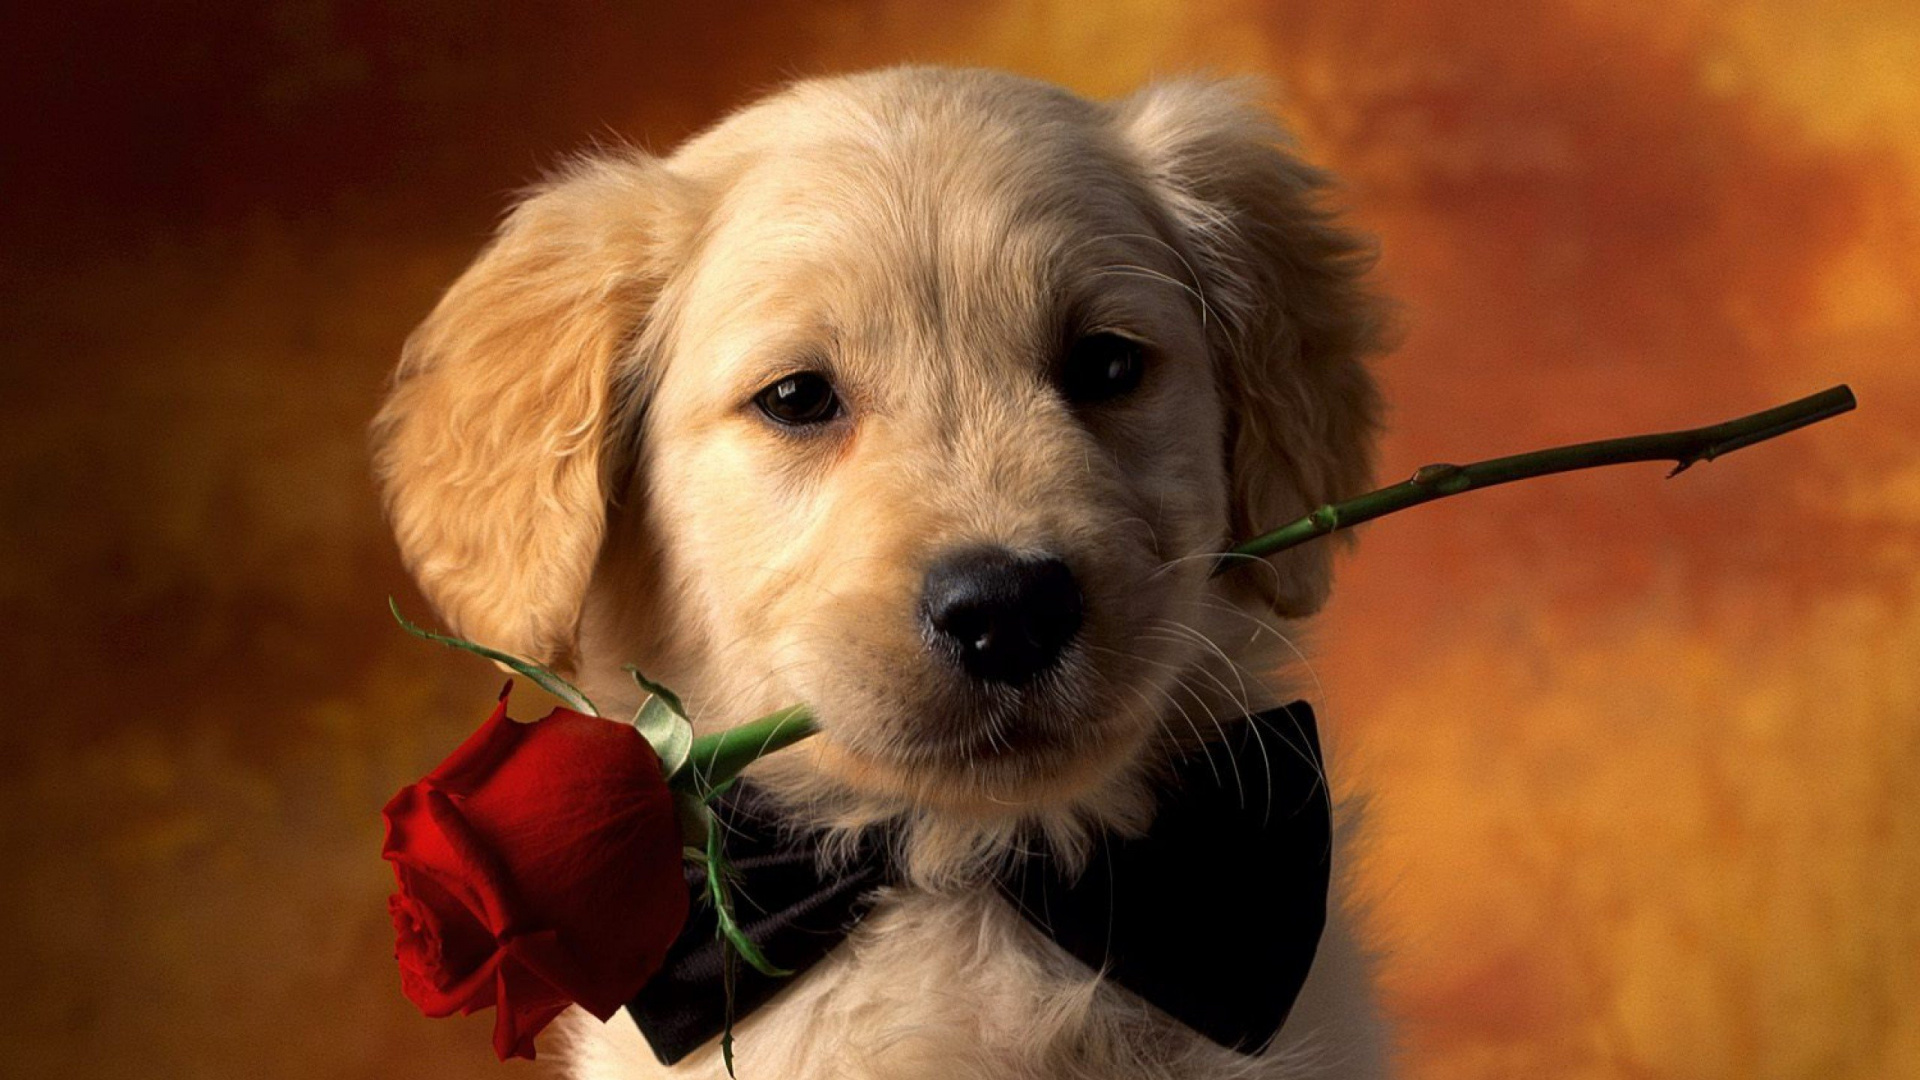 White Short Coated Dog With Red Rose on Head. Wallpaper in 1920x1080 Resolution